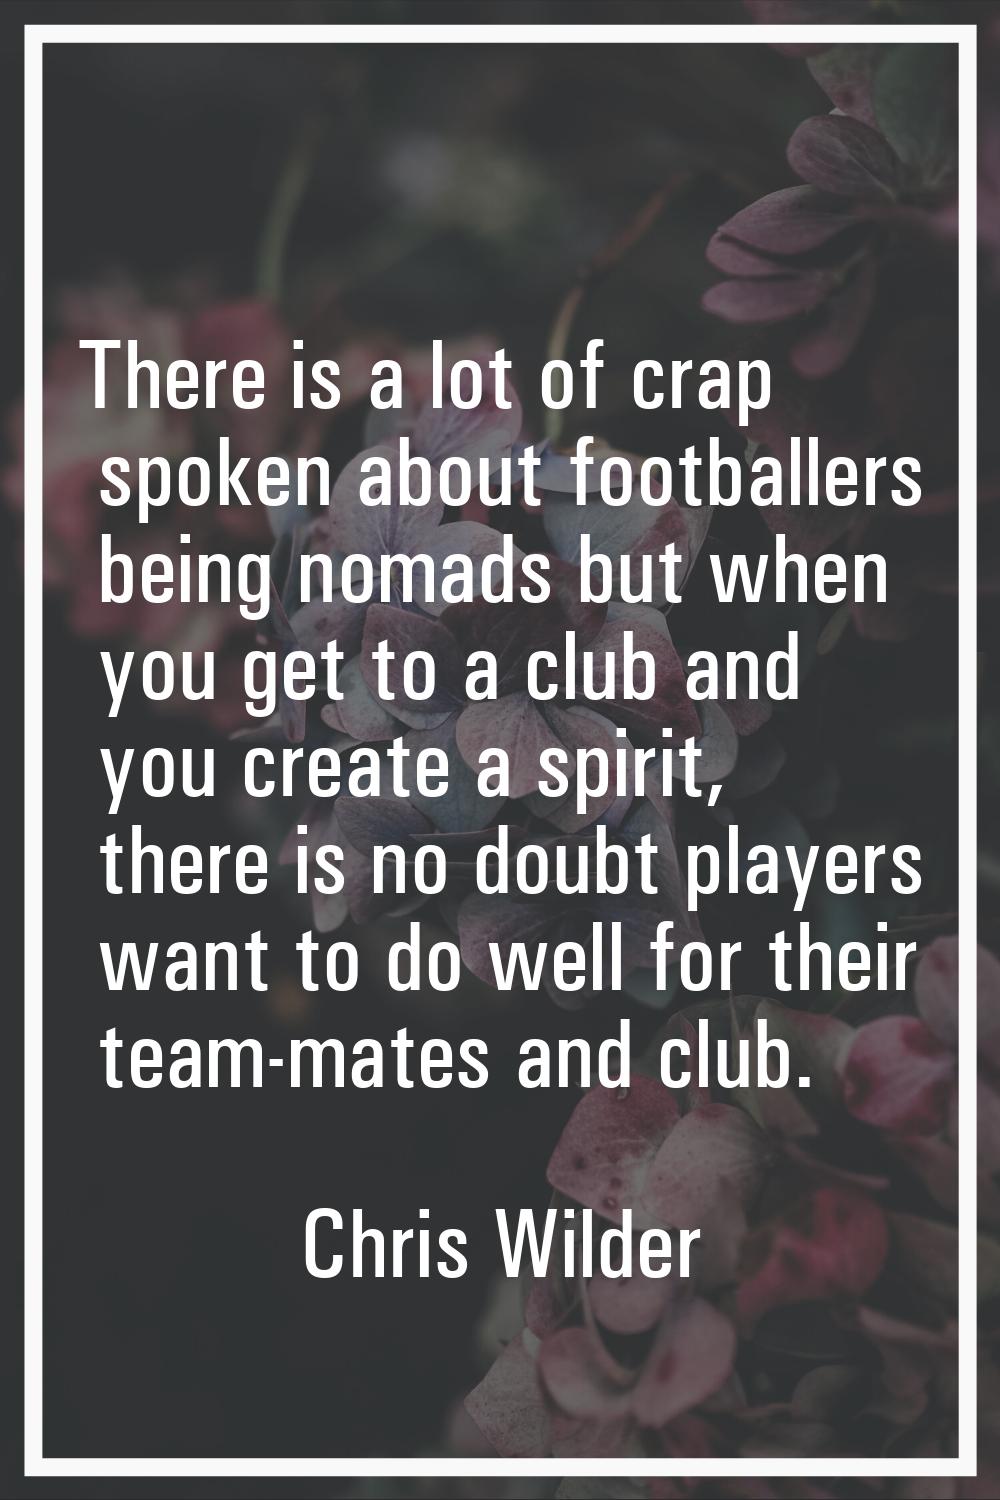 There is a lot of crap spoken about footballers being nomads but when you get to a club and you cre